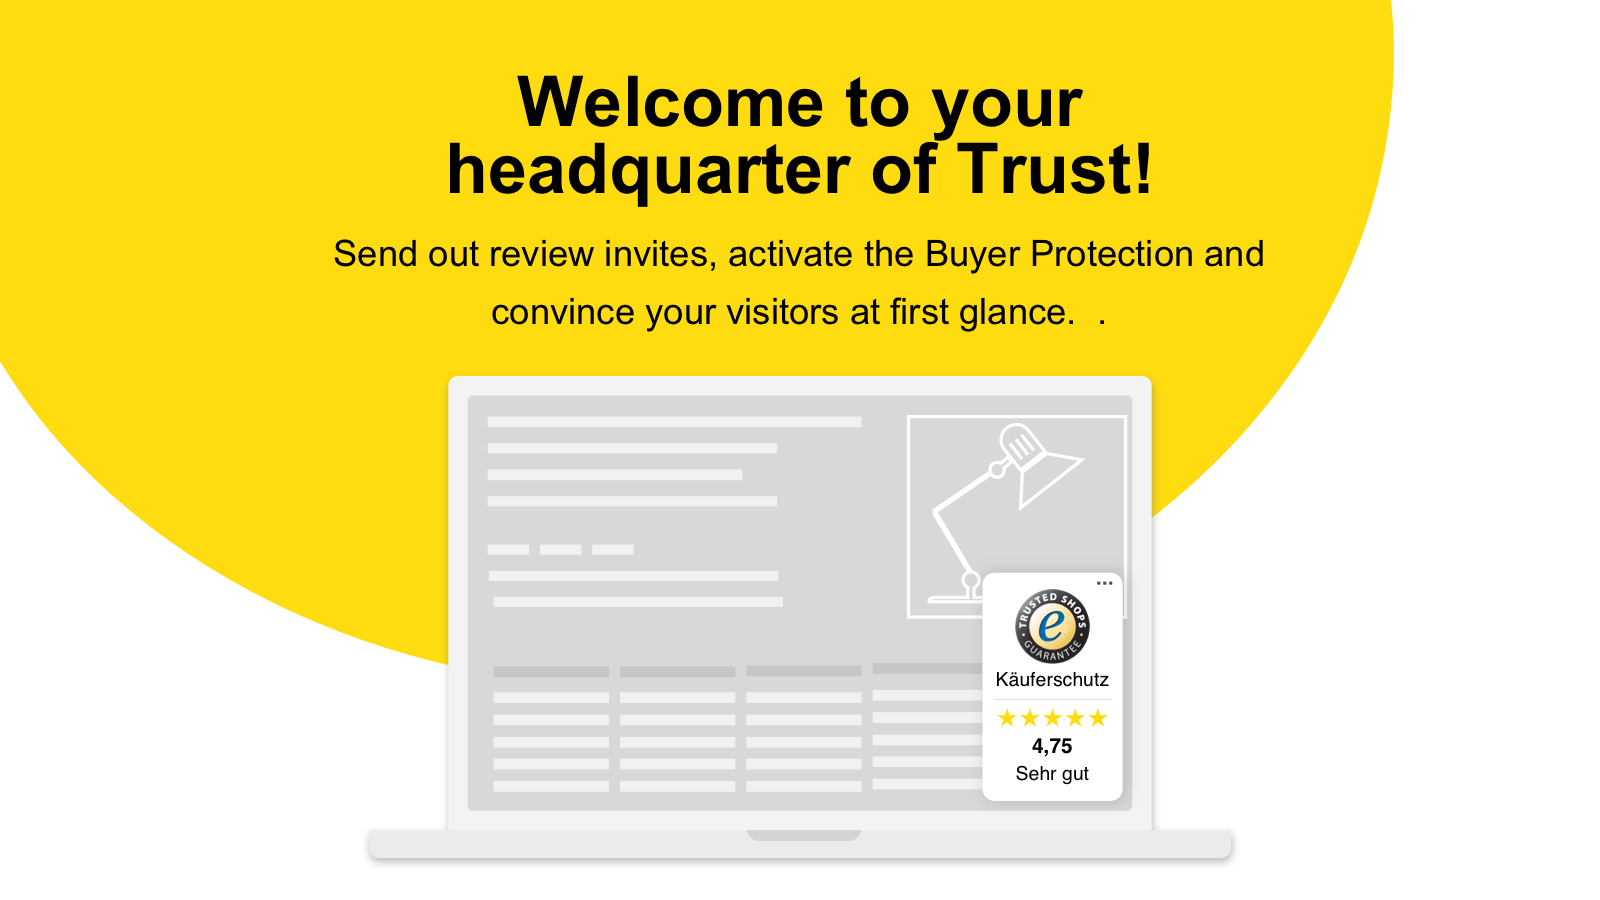 Welcome to the headquarters of Trust!